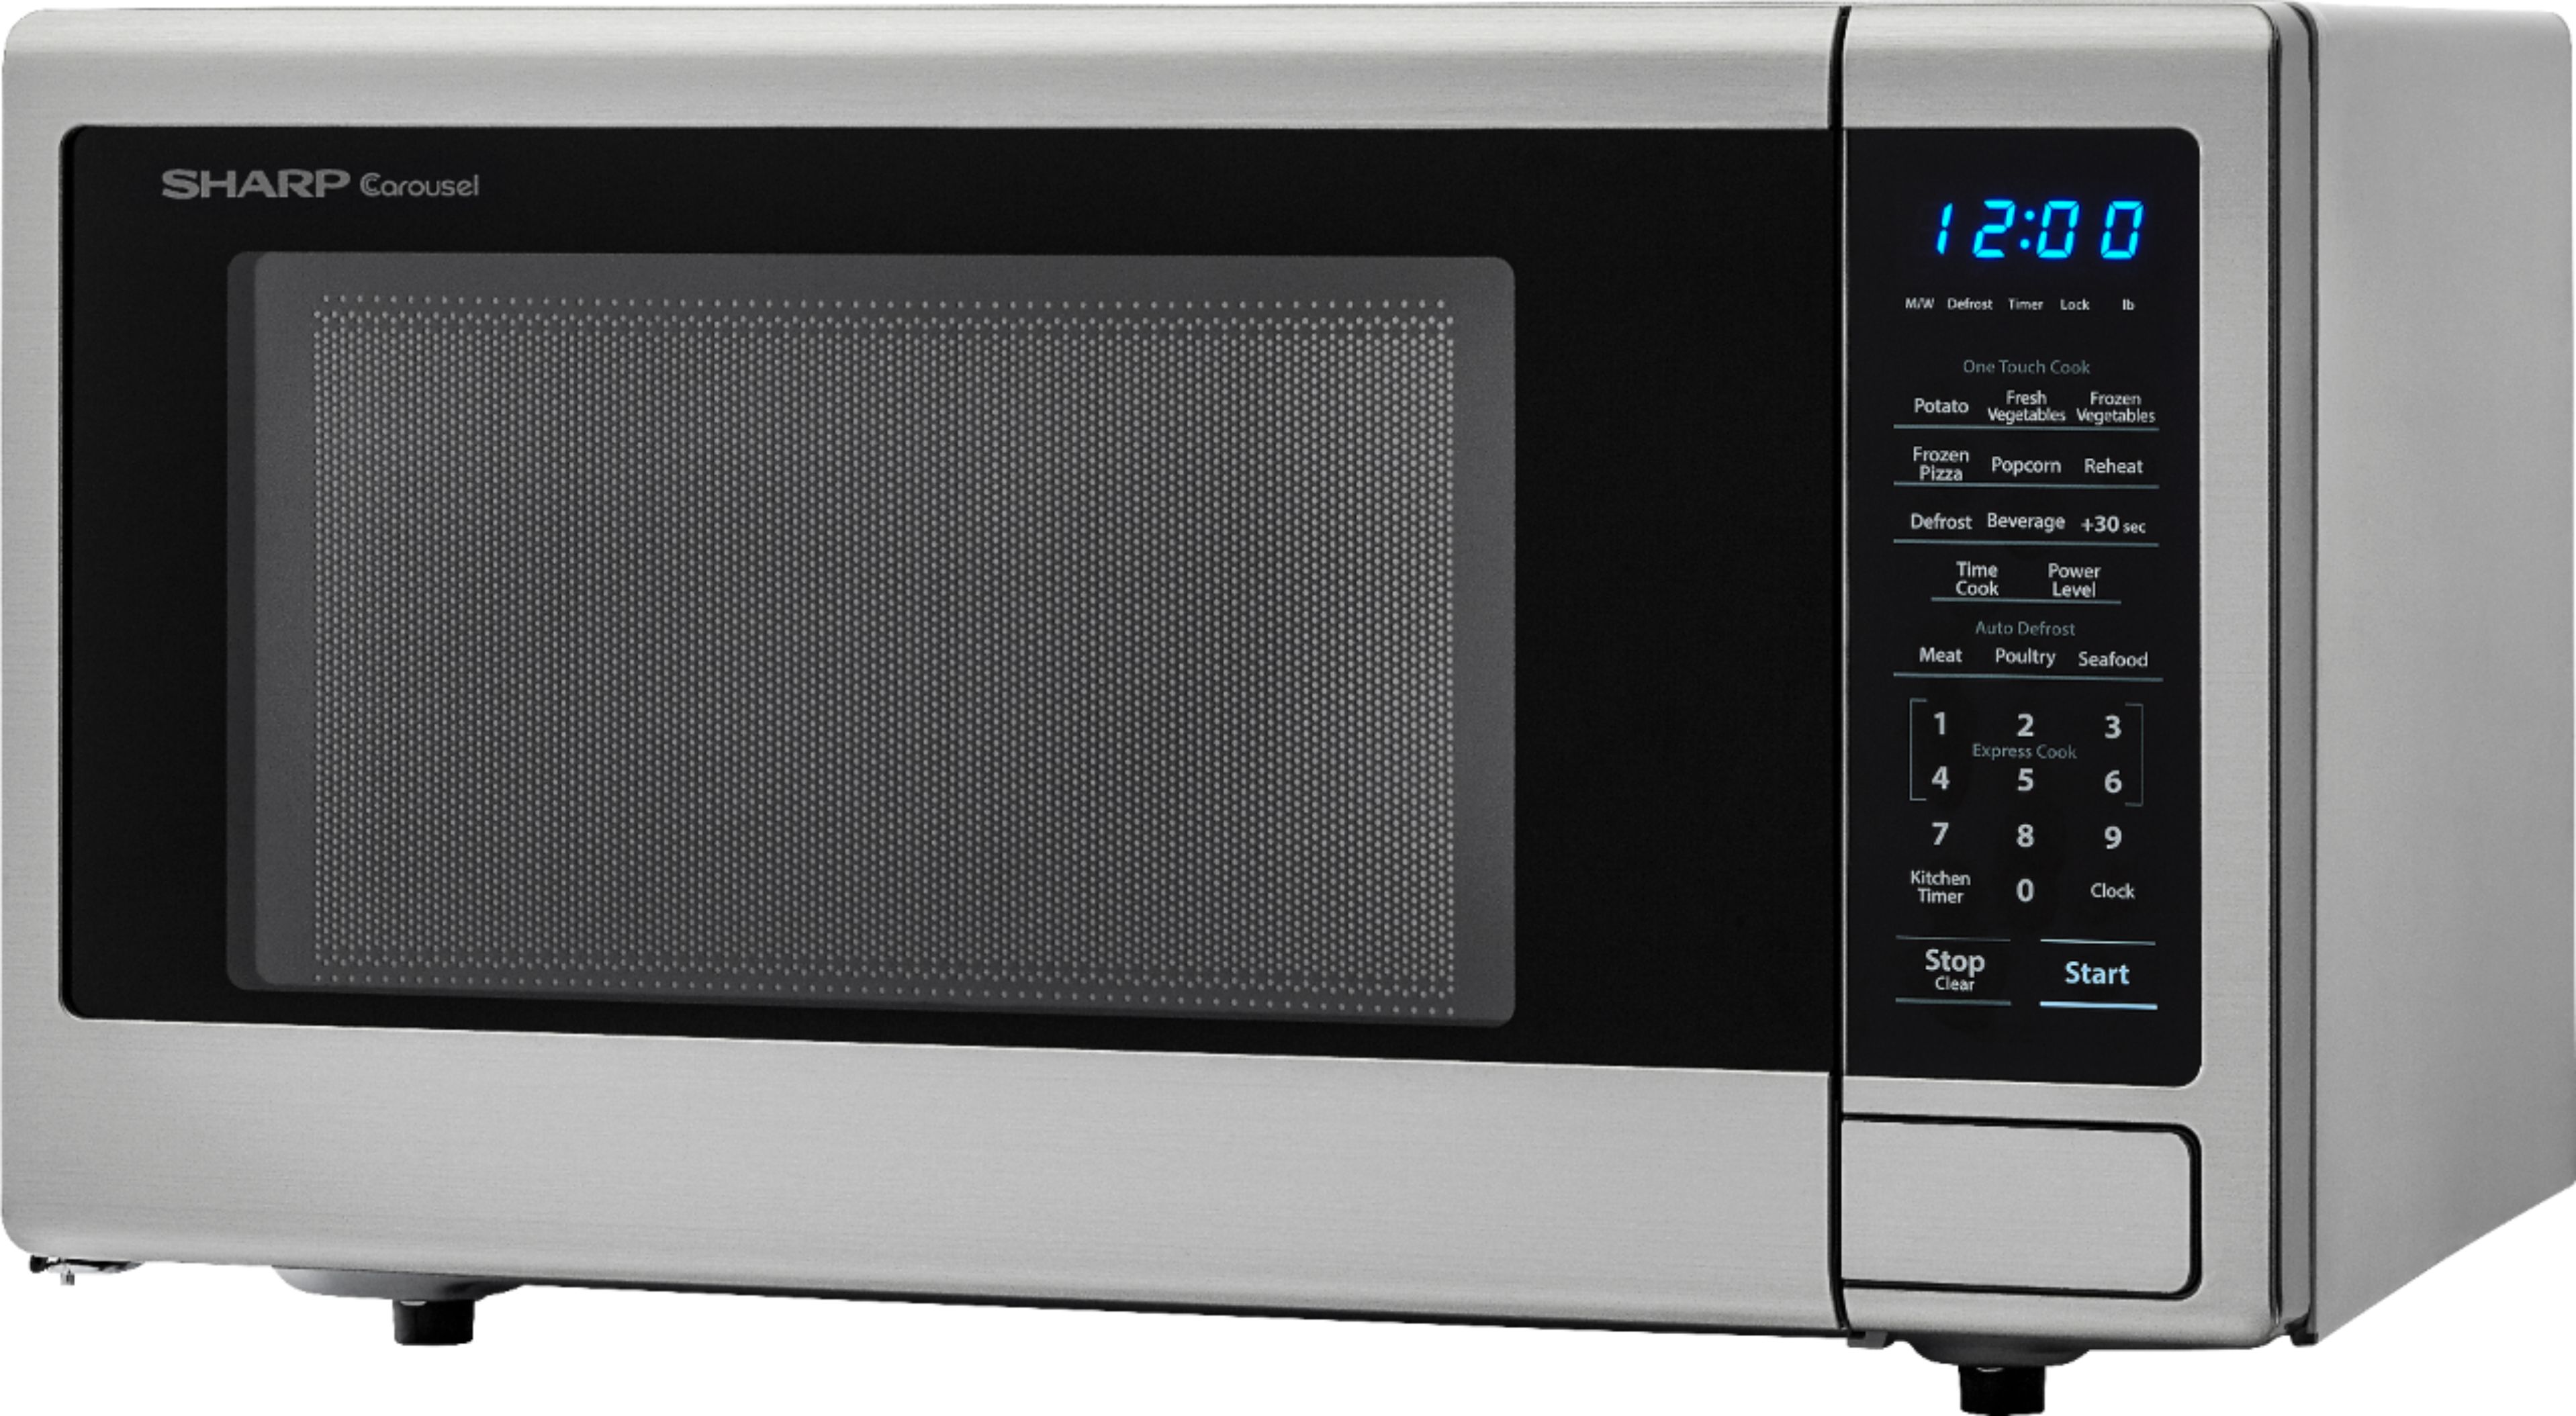 Left View: Sharp - Carousel 1.8 Cu. Ft. Microwave - Stainless steel